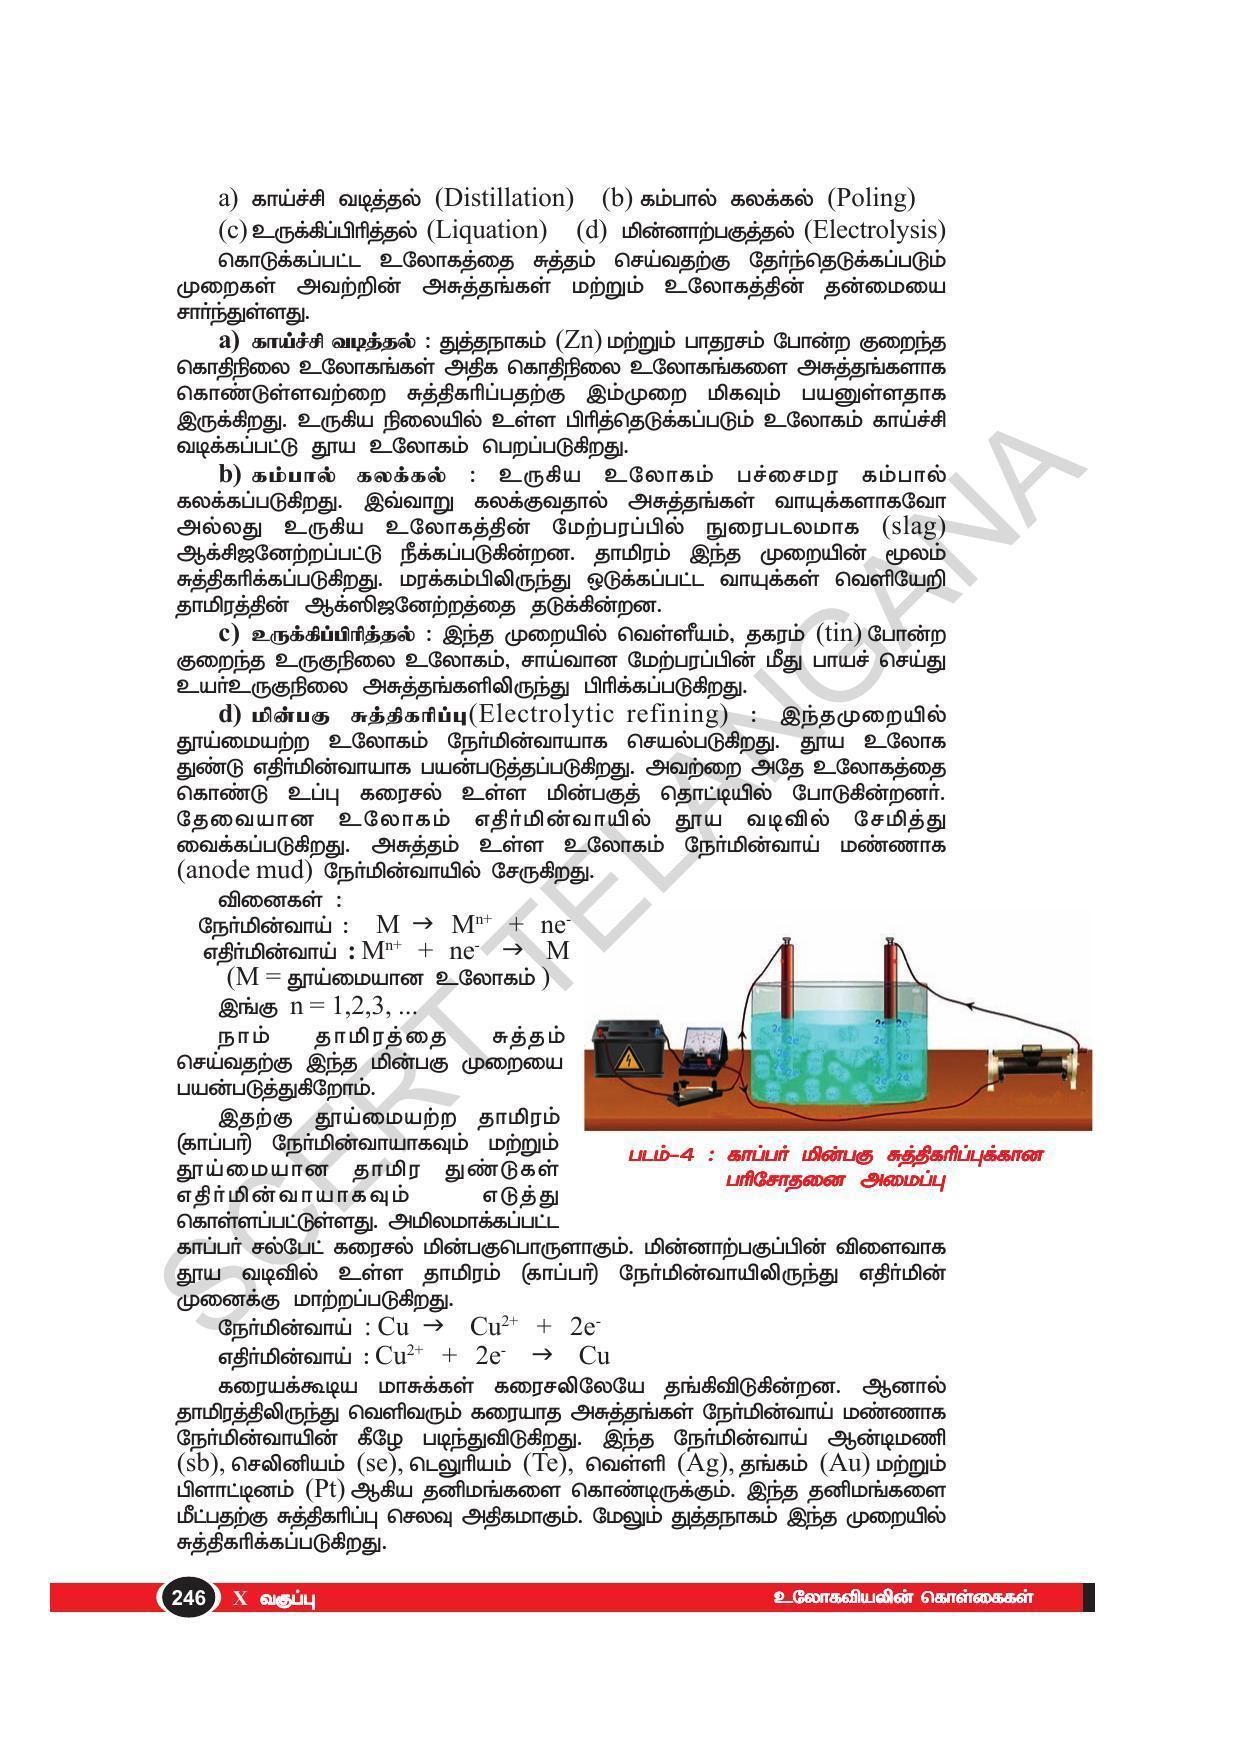 TS SCERT Class 10 Physical Science(Tamil Medium) Text Book - Page 258